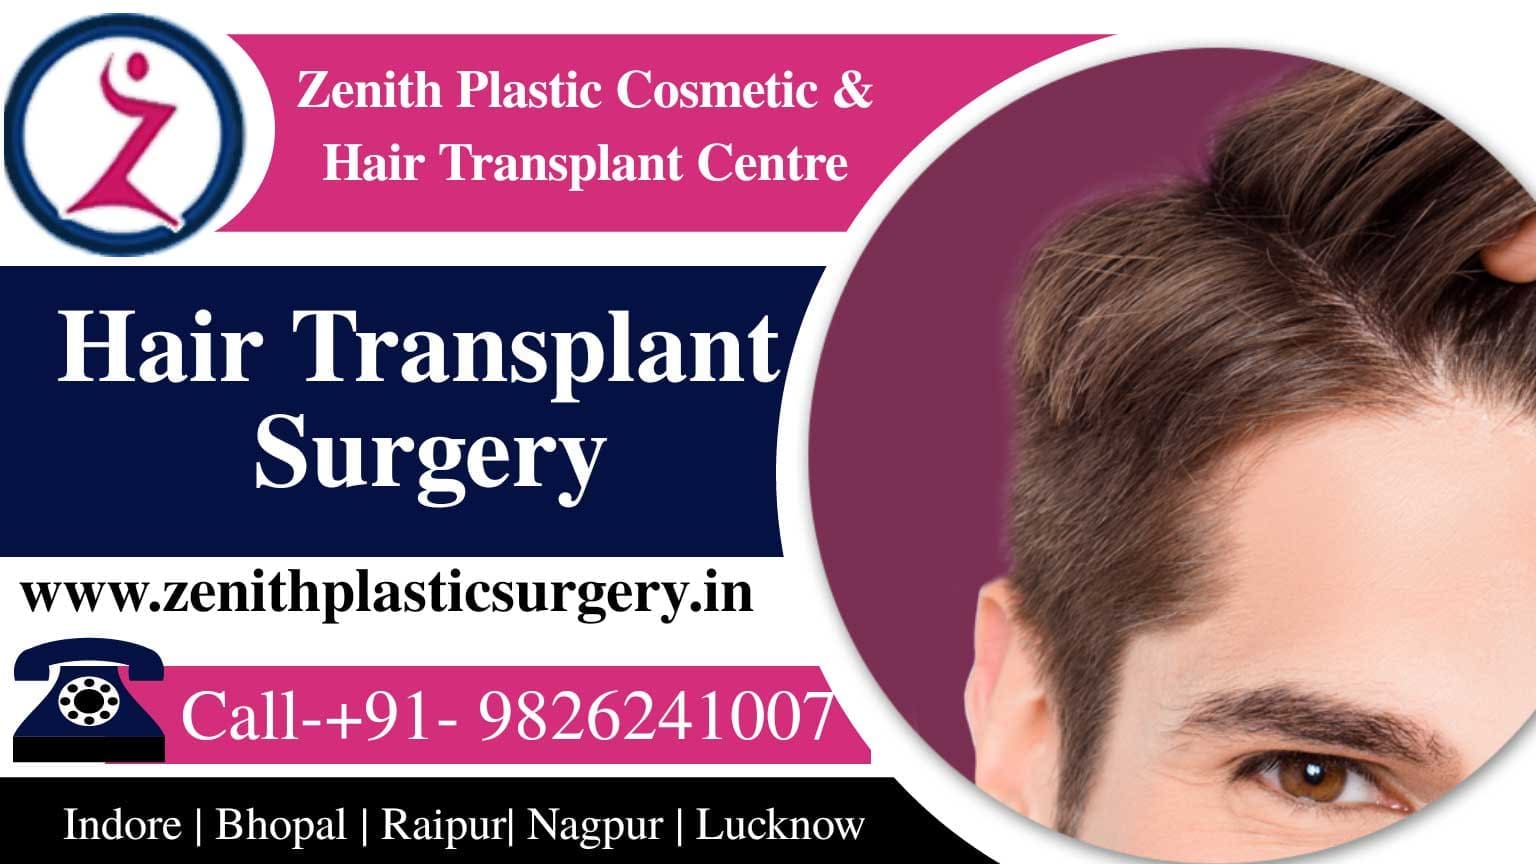 Zenith Plastic Cosmetic and Hair Transplant Centre